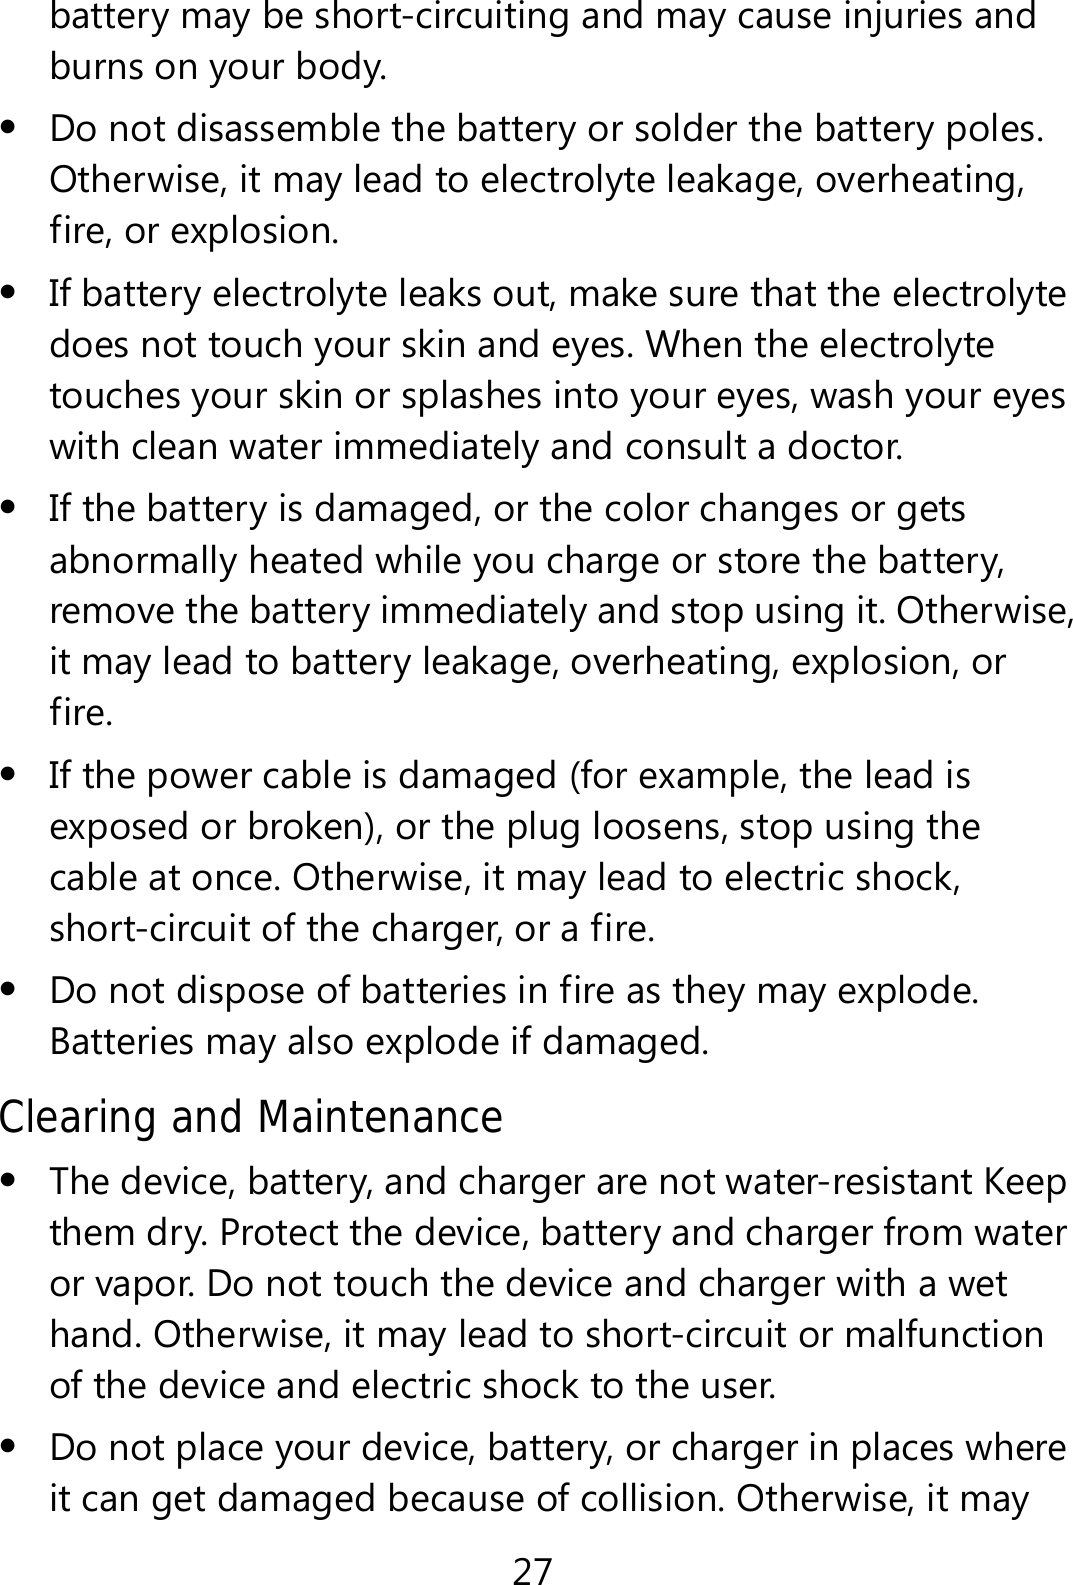 27 battery may be short-circuiting and may cause injuries and burns on your body.  Do not disassemble the battery or solder the battery poles. Otherwise, it may lead to electrolyte leakage, overheating, fire, or explosion.  If battery electrolyte leaks out, make sure that the electrolyte does not touch your skin and eyes. When the electrolyte touches your skin or splashes into your eyes, wash your eyes with clean water immediately and consult a doctor.  If the battery is damaged, or the color changes or gets abnormally heated while you charge or store the battery, remove the battery immediately and stop using it. Otherwise, it may lead to battery leakage, overheating, explosion, or fire.  If the power cable is damaged (for example, the lead is exposed or broken), or the plug loosens, stop using the cable at once. Otherwise, it may lead to electric shock, short-circuit of the charger, or a fire.  Do not dispose of batteries in fire as they may explode. Batteries may also explode if damaged. Clearing and Maintenance  The device, battery, and charger are not water-resistant Keep them dry. Protect the device, battery and charger from water or vapor. Do not touch the device and charger with a wet hand. Otherwise, it may lead to short-circuit or malfunction of the device and electric shock to the user.  Do not place your device, battery, or charger in places where it can get damaged because of collision. Otherwise, it may 